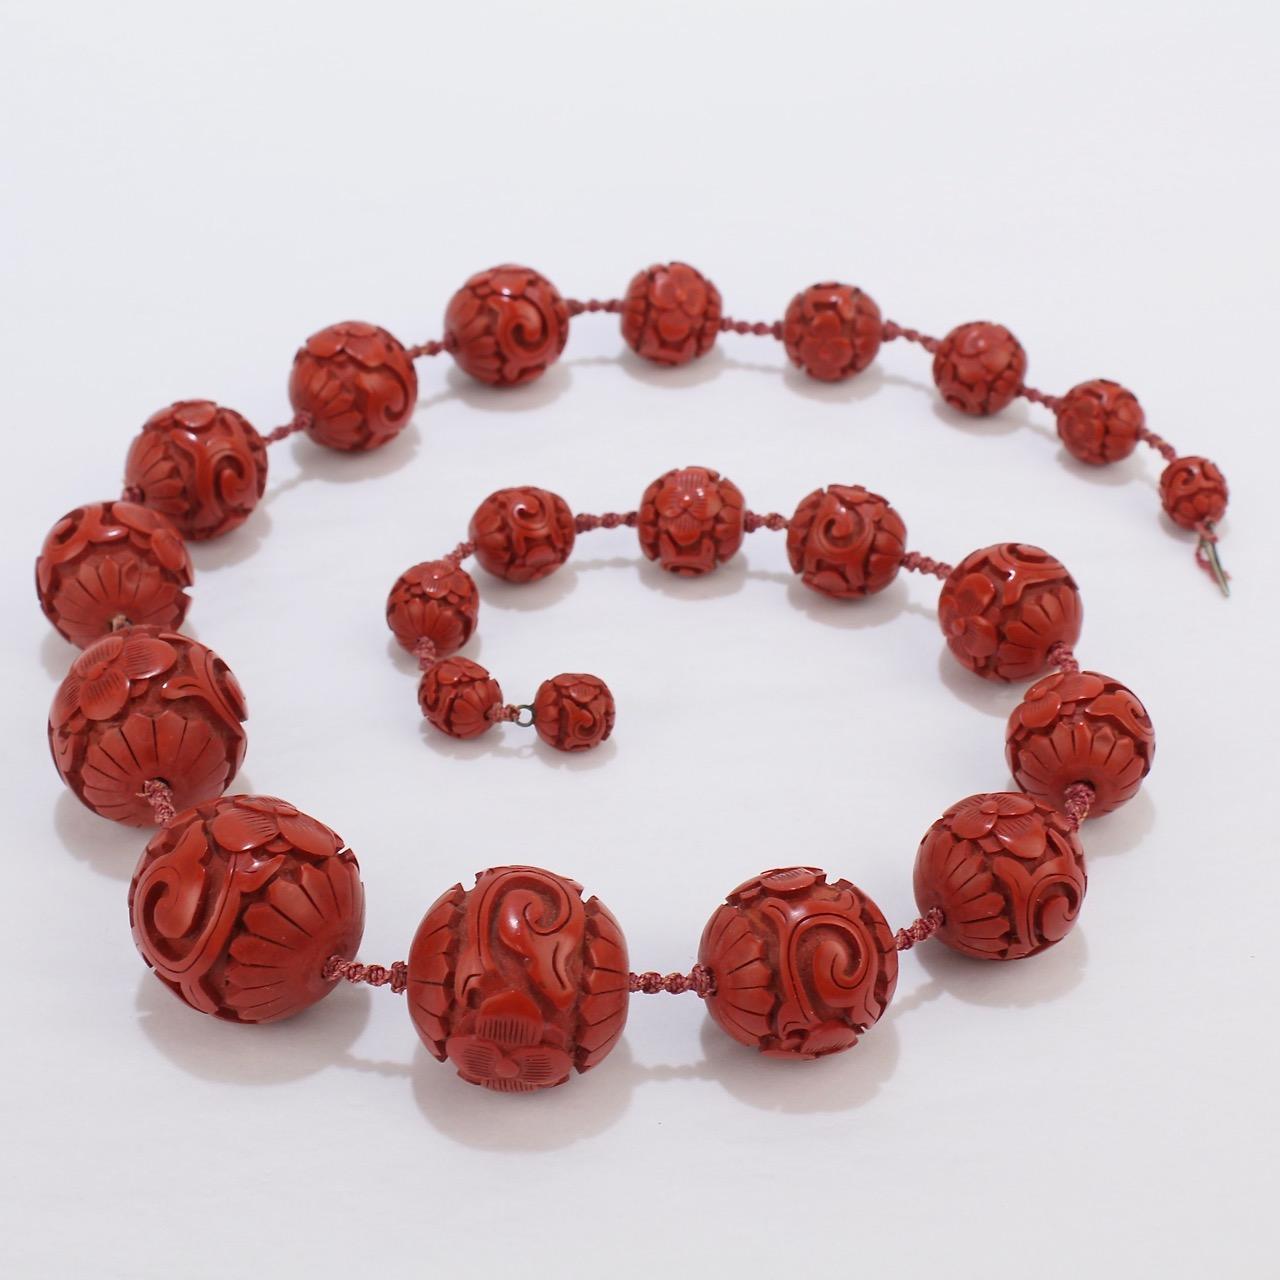 A rare and fine Chinese cinnabar graduated beaded necklace.

Found in a Boston estate. By repute, the necklace was purchased with numerous other Chinese items in the 1920s.

The beads range from 11 mm to 29 mm in diameter and are strung on an